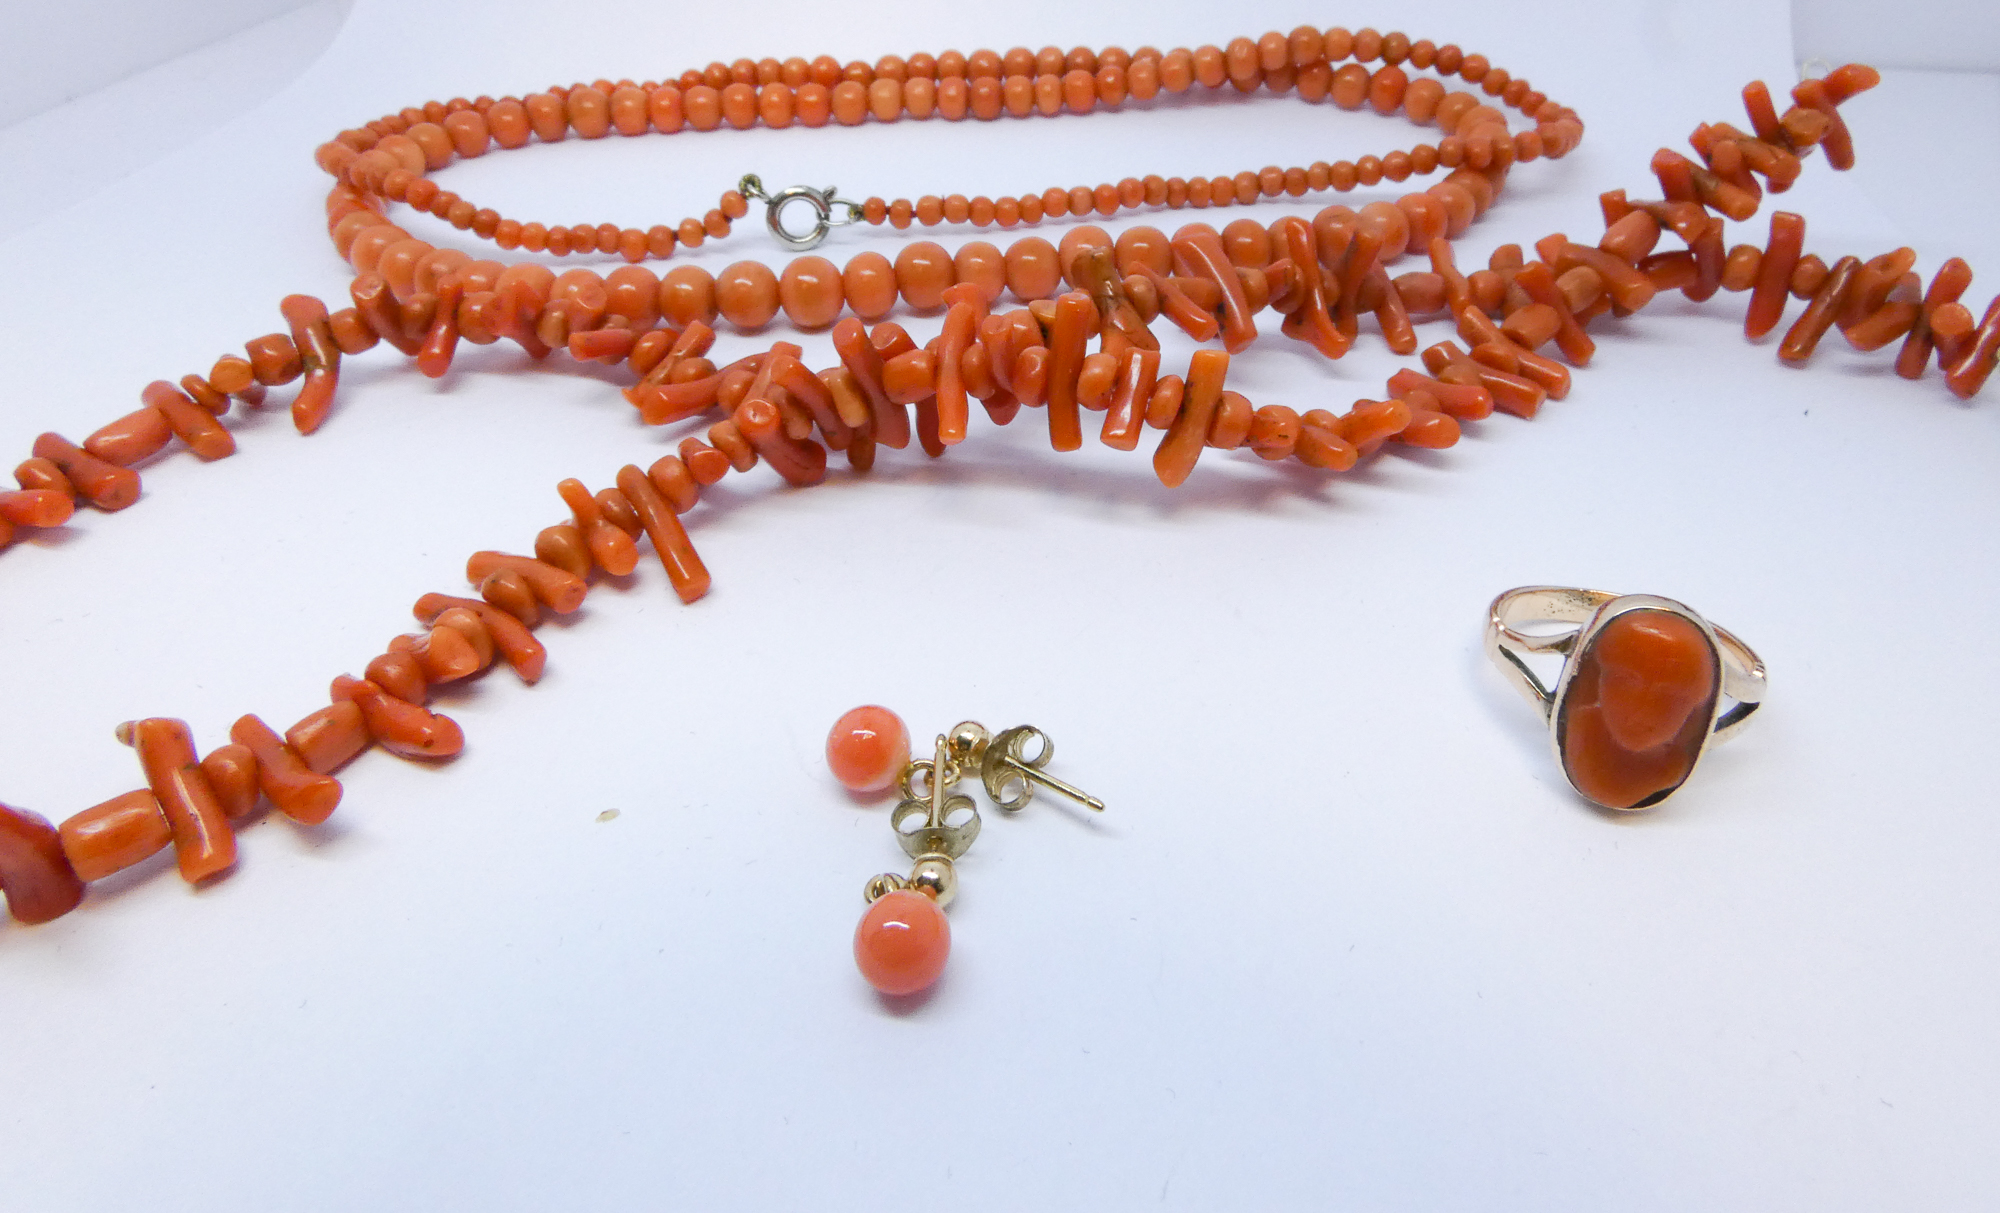 Stick Coral necklace, graduated coral bead necklace, - Image 2 of 2